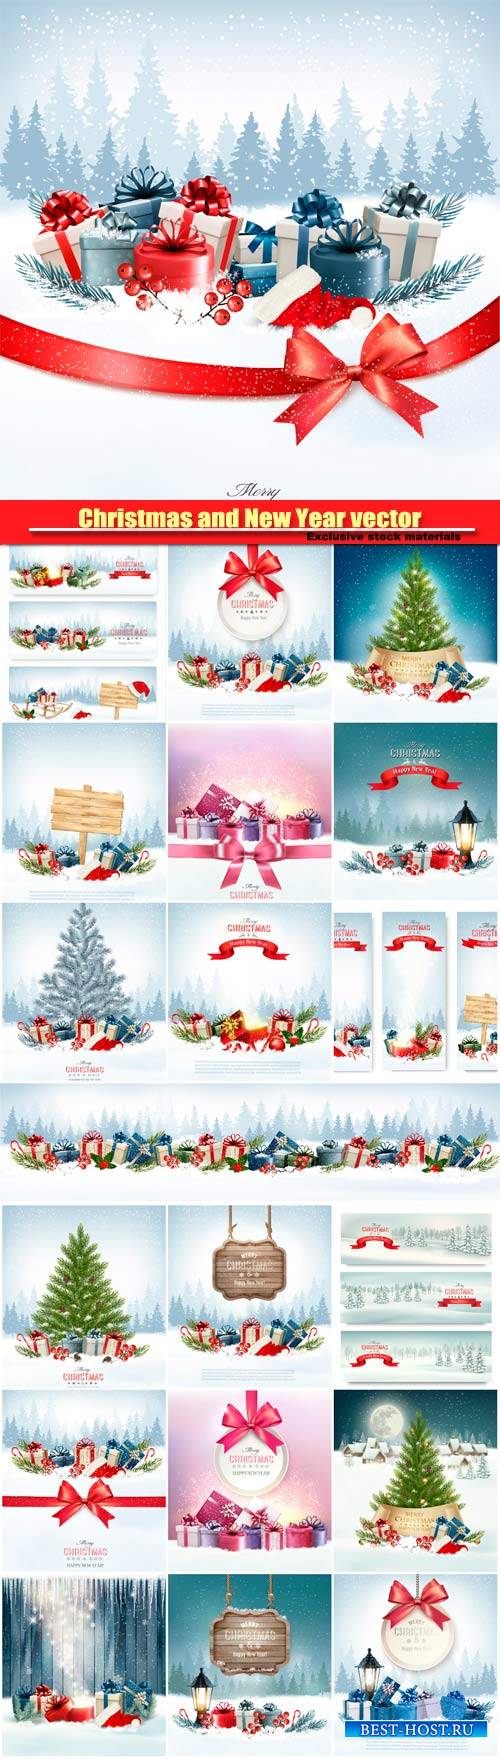 Christmas and New Year vector, holiday background, christmas tree and prese ...